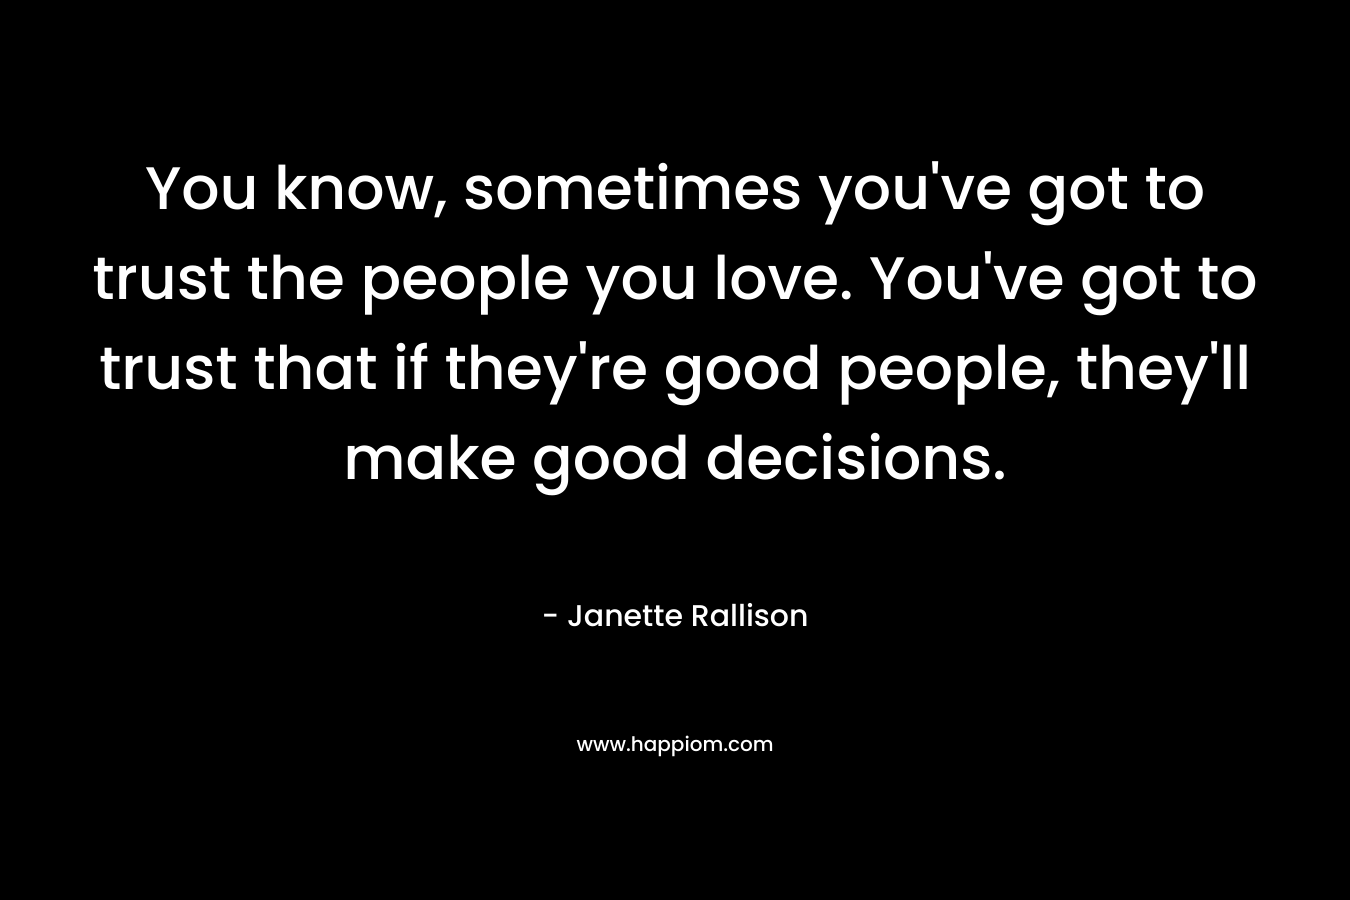 You know, sometimes you've got to trust the people you love. You've got to trust that if they're good people, they'll make good decisions.